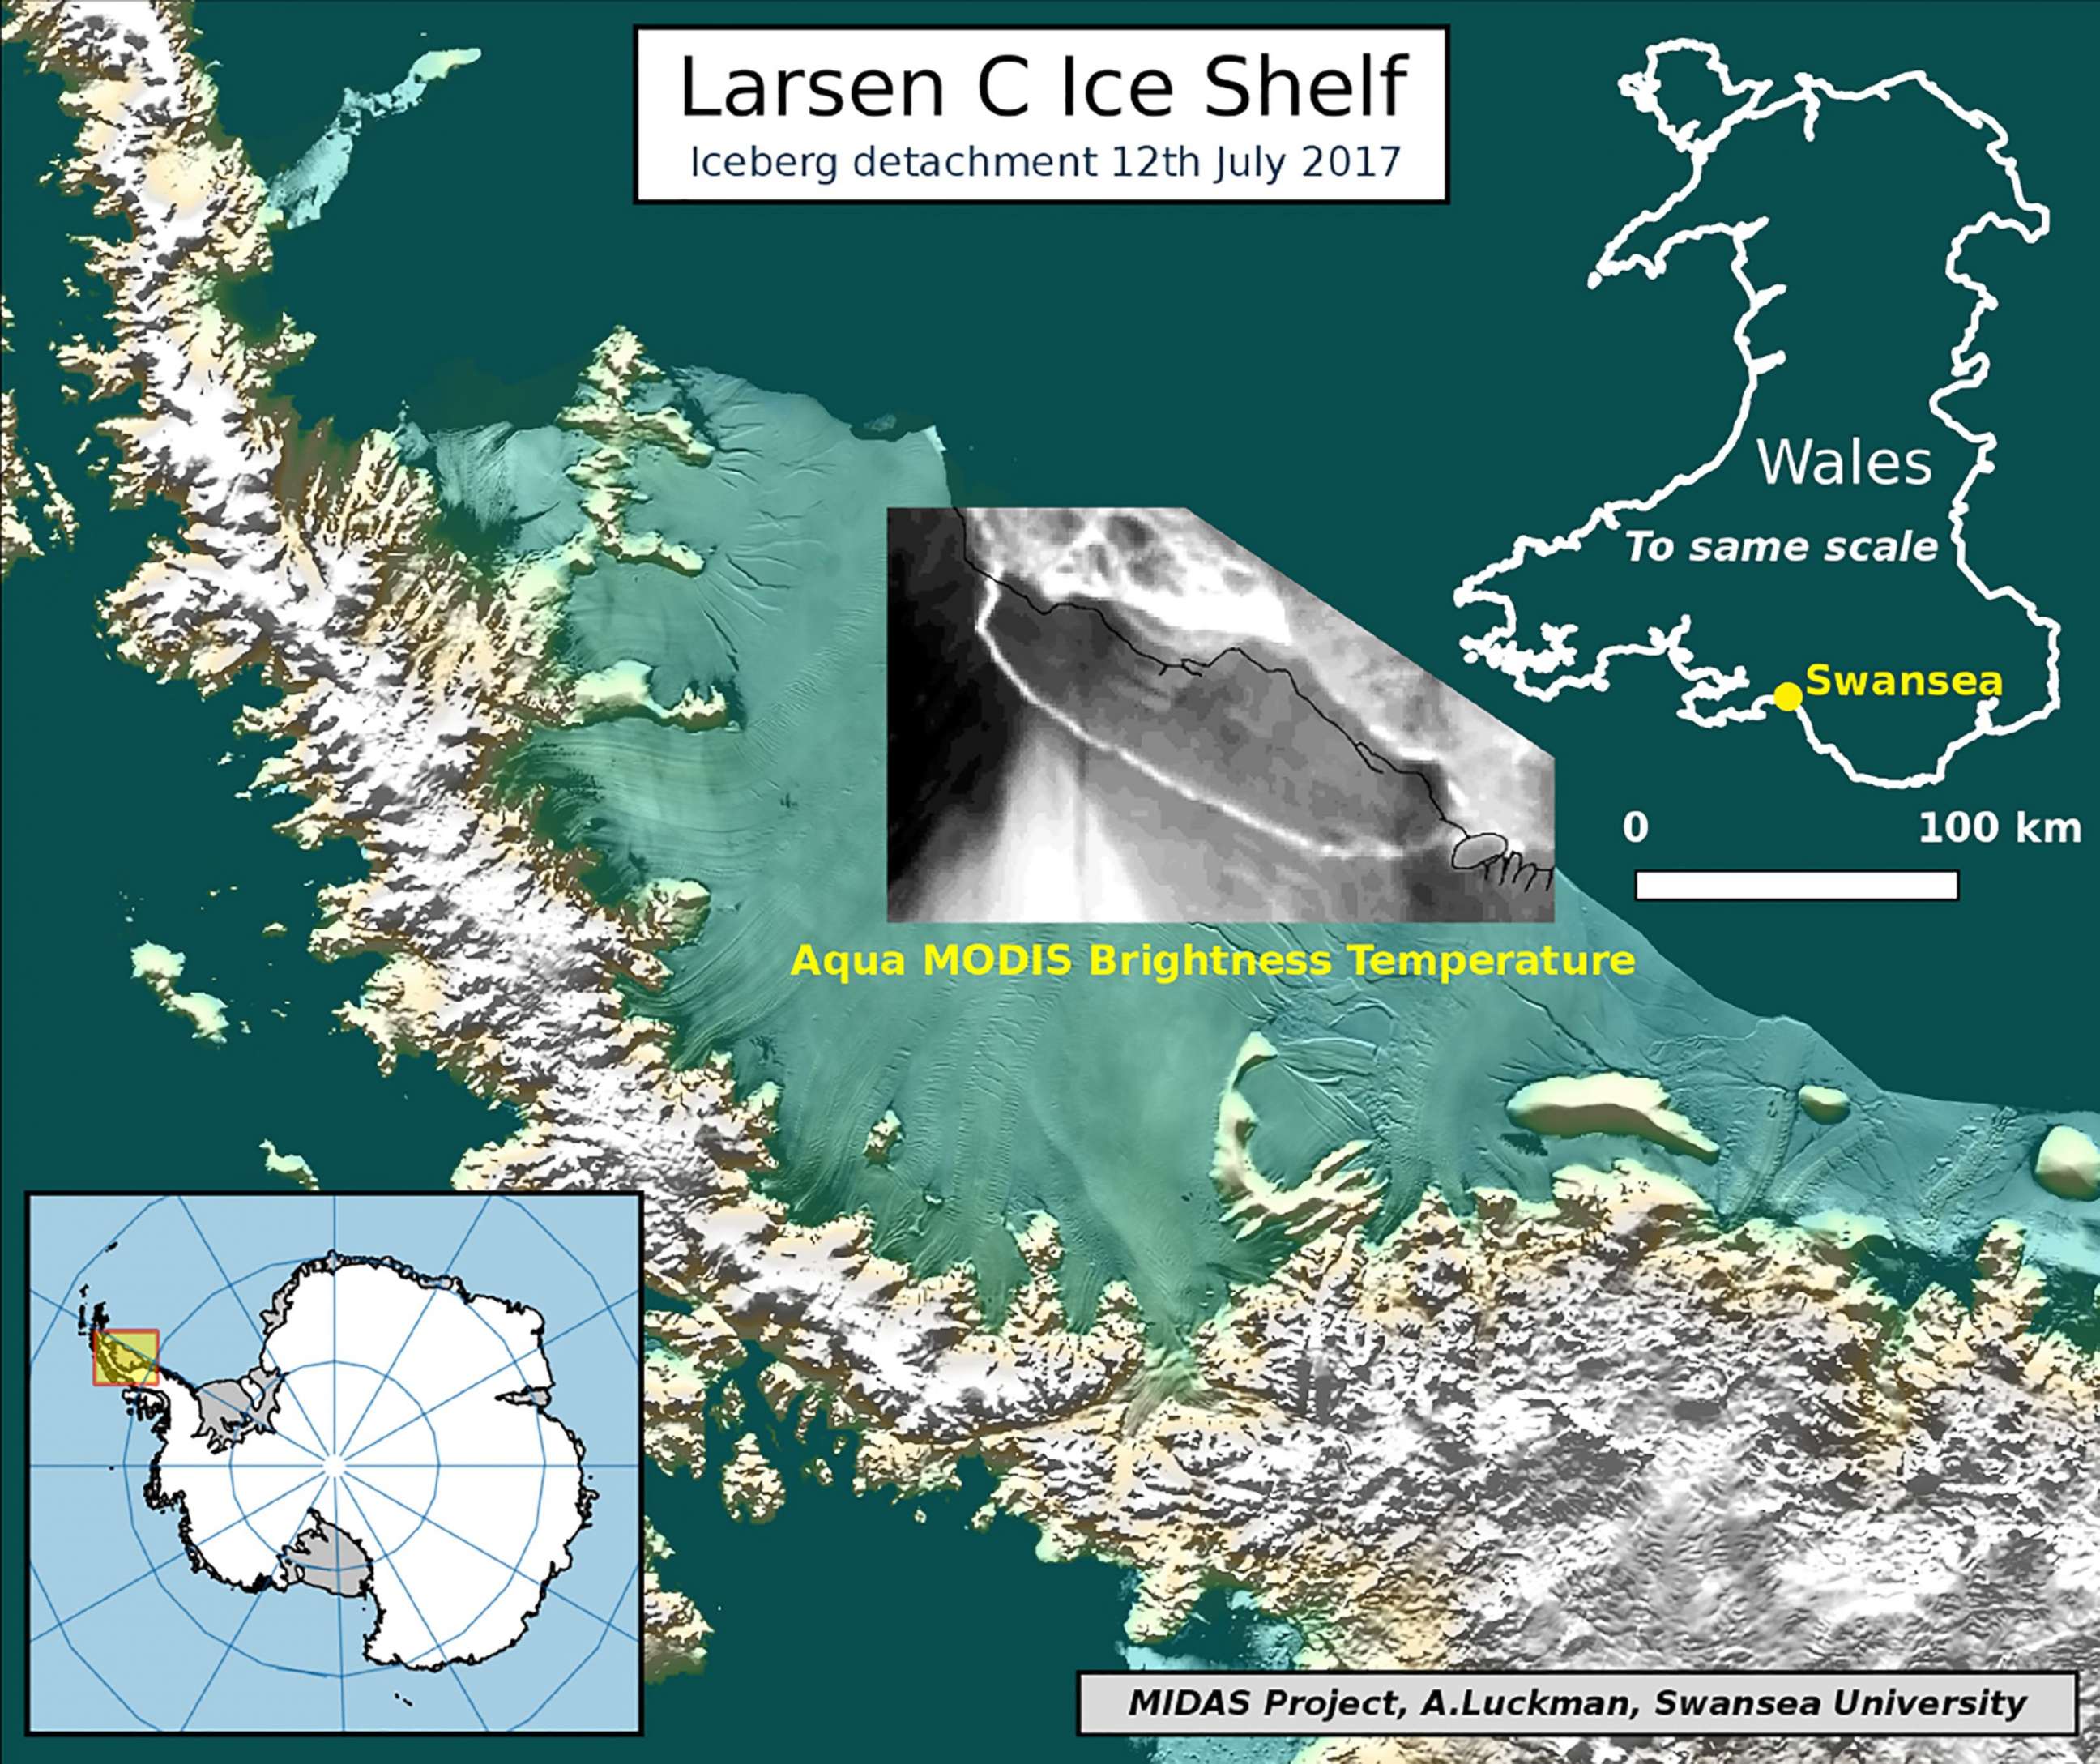 PHOTO: An illustration depicting an iceberg detachment from the Larsen C Ice Shelf in Antarctica, July 12, 2017.